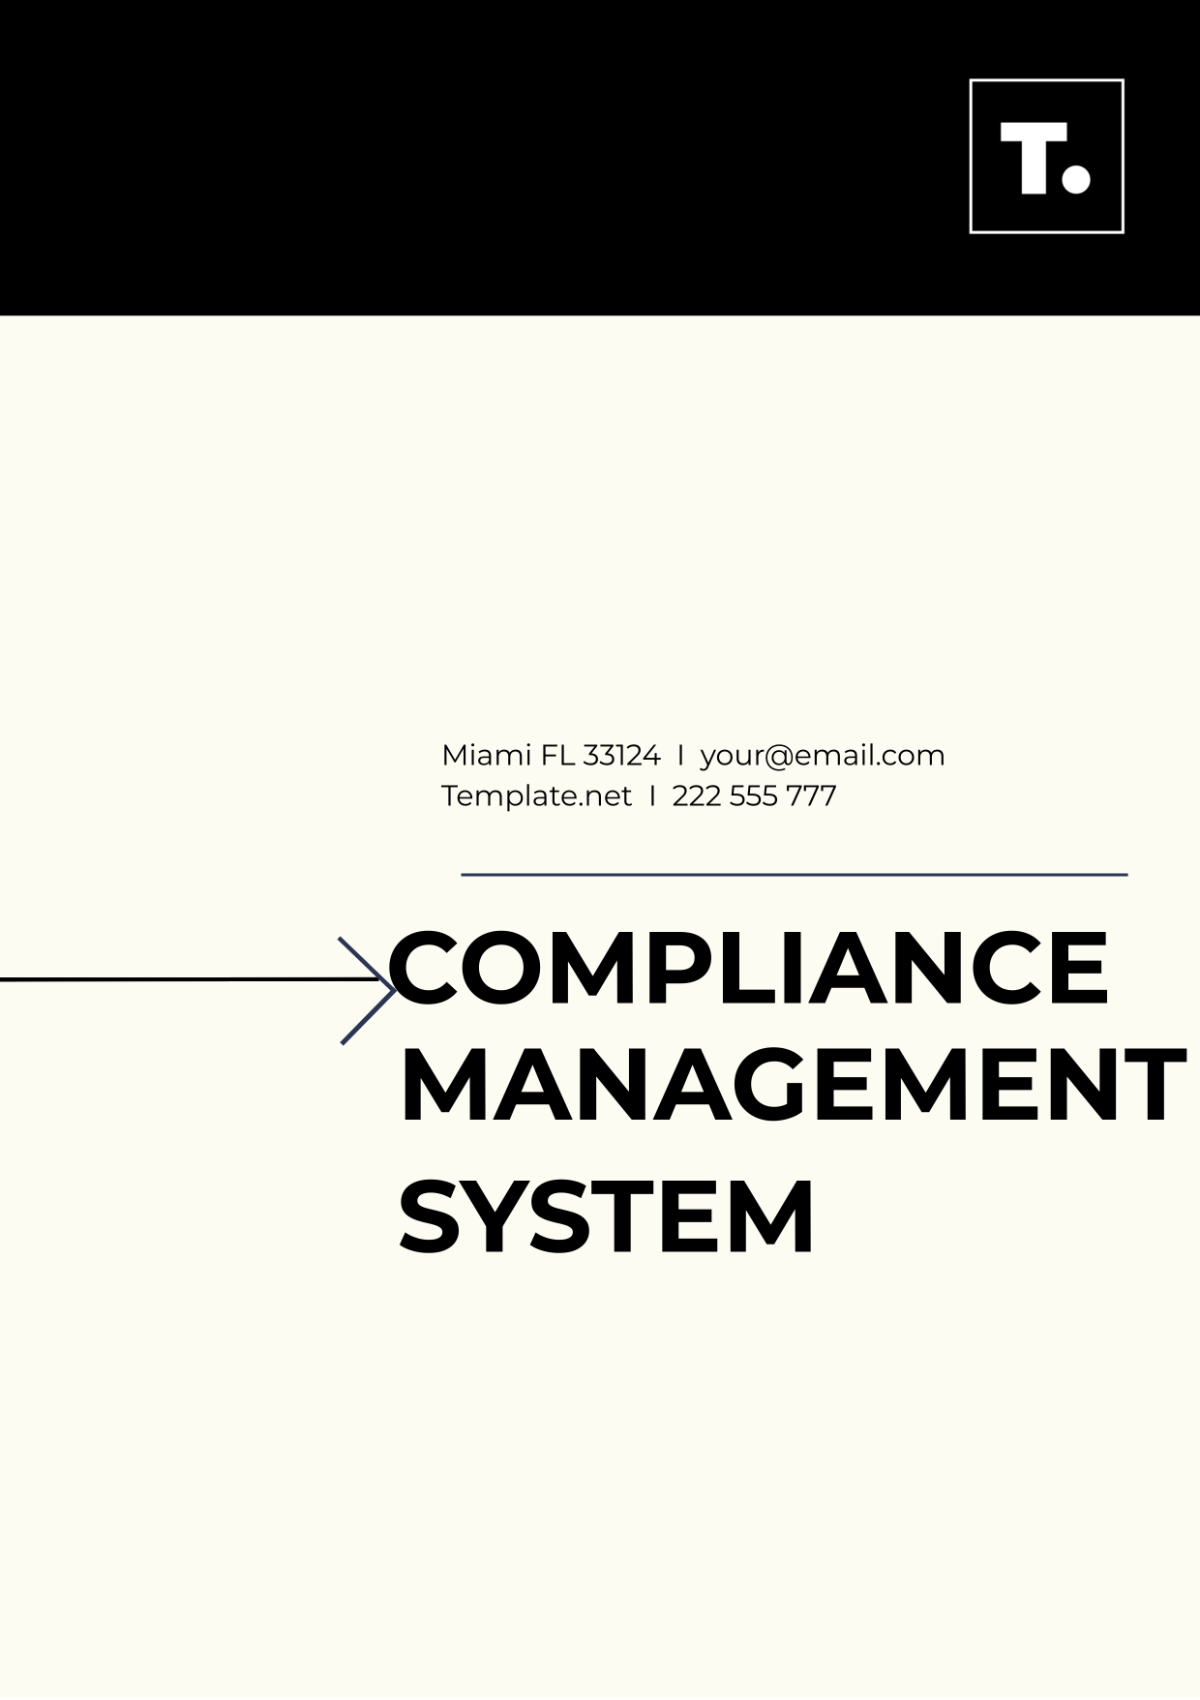 Compliance Management System Template